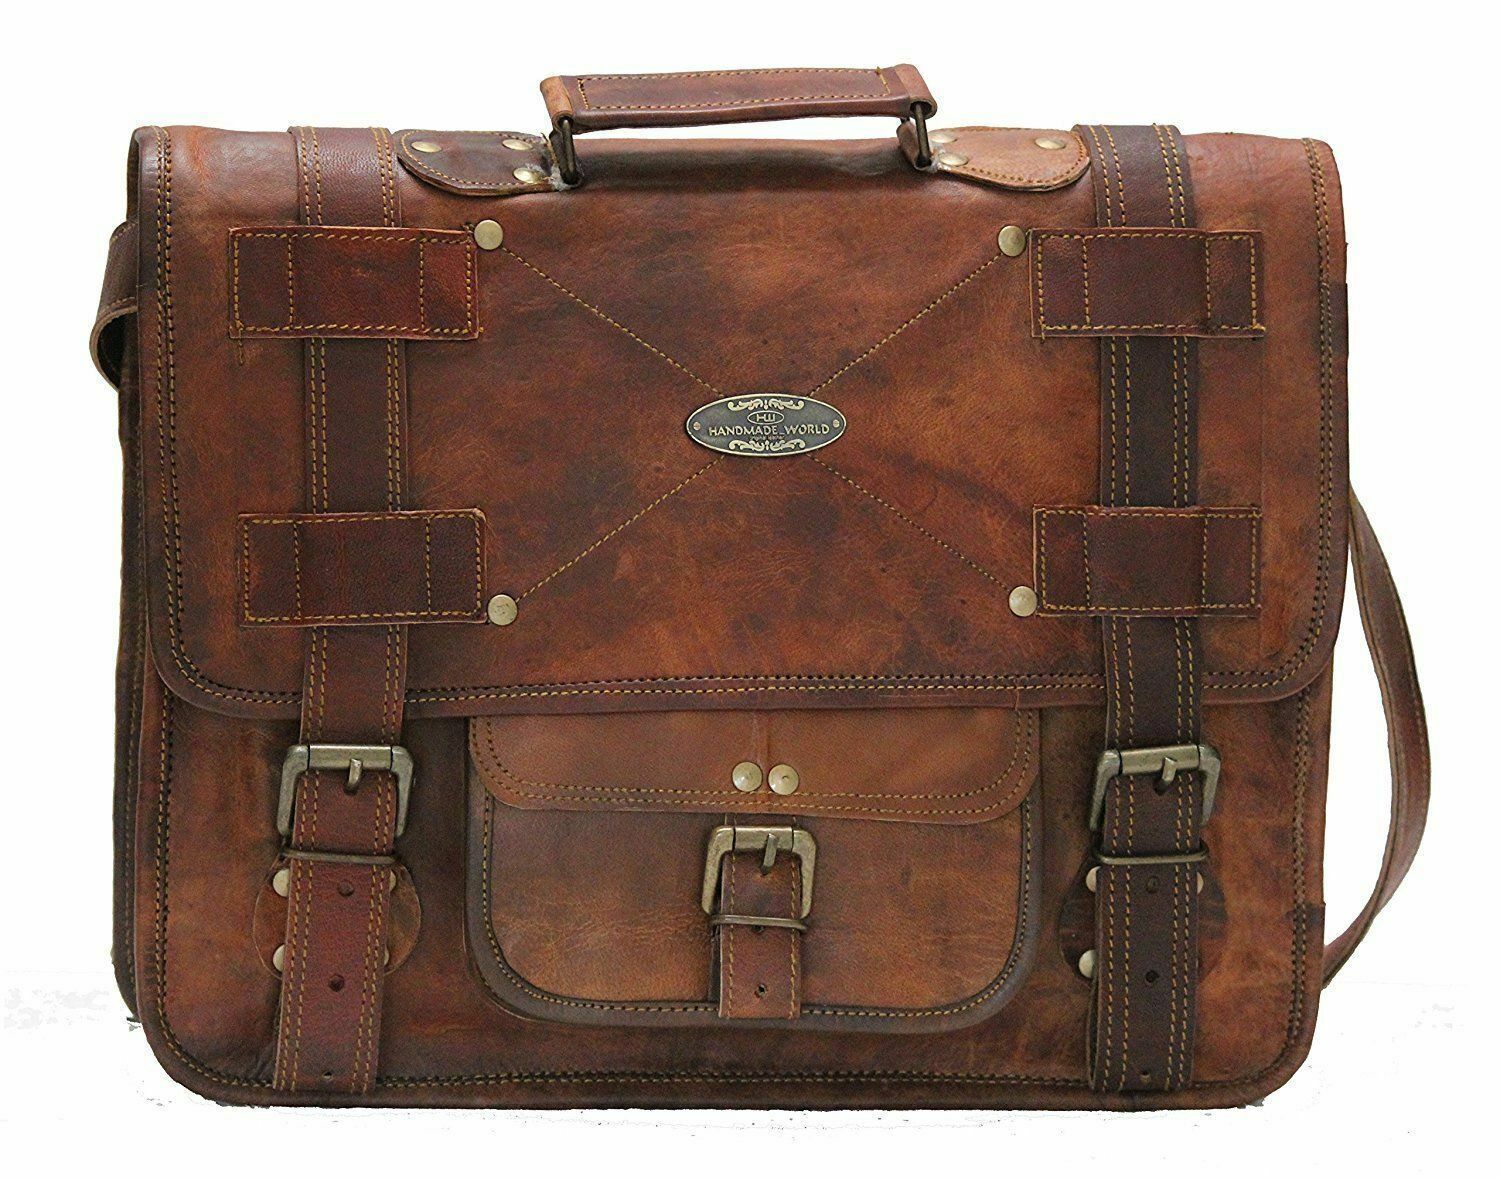 Vintage Brown Leather Cross-Body Satchel For Women Christmas Day Gift ...